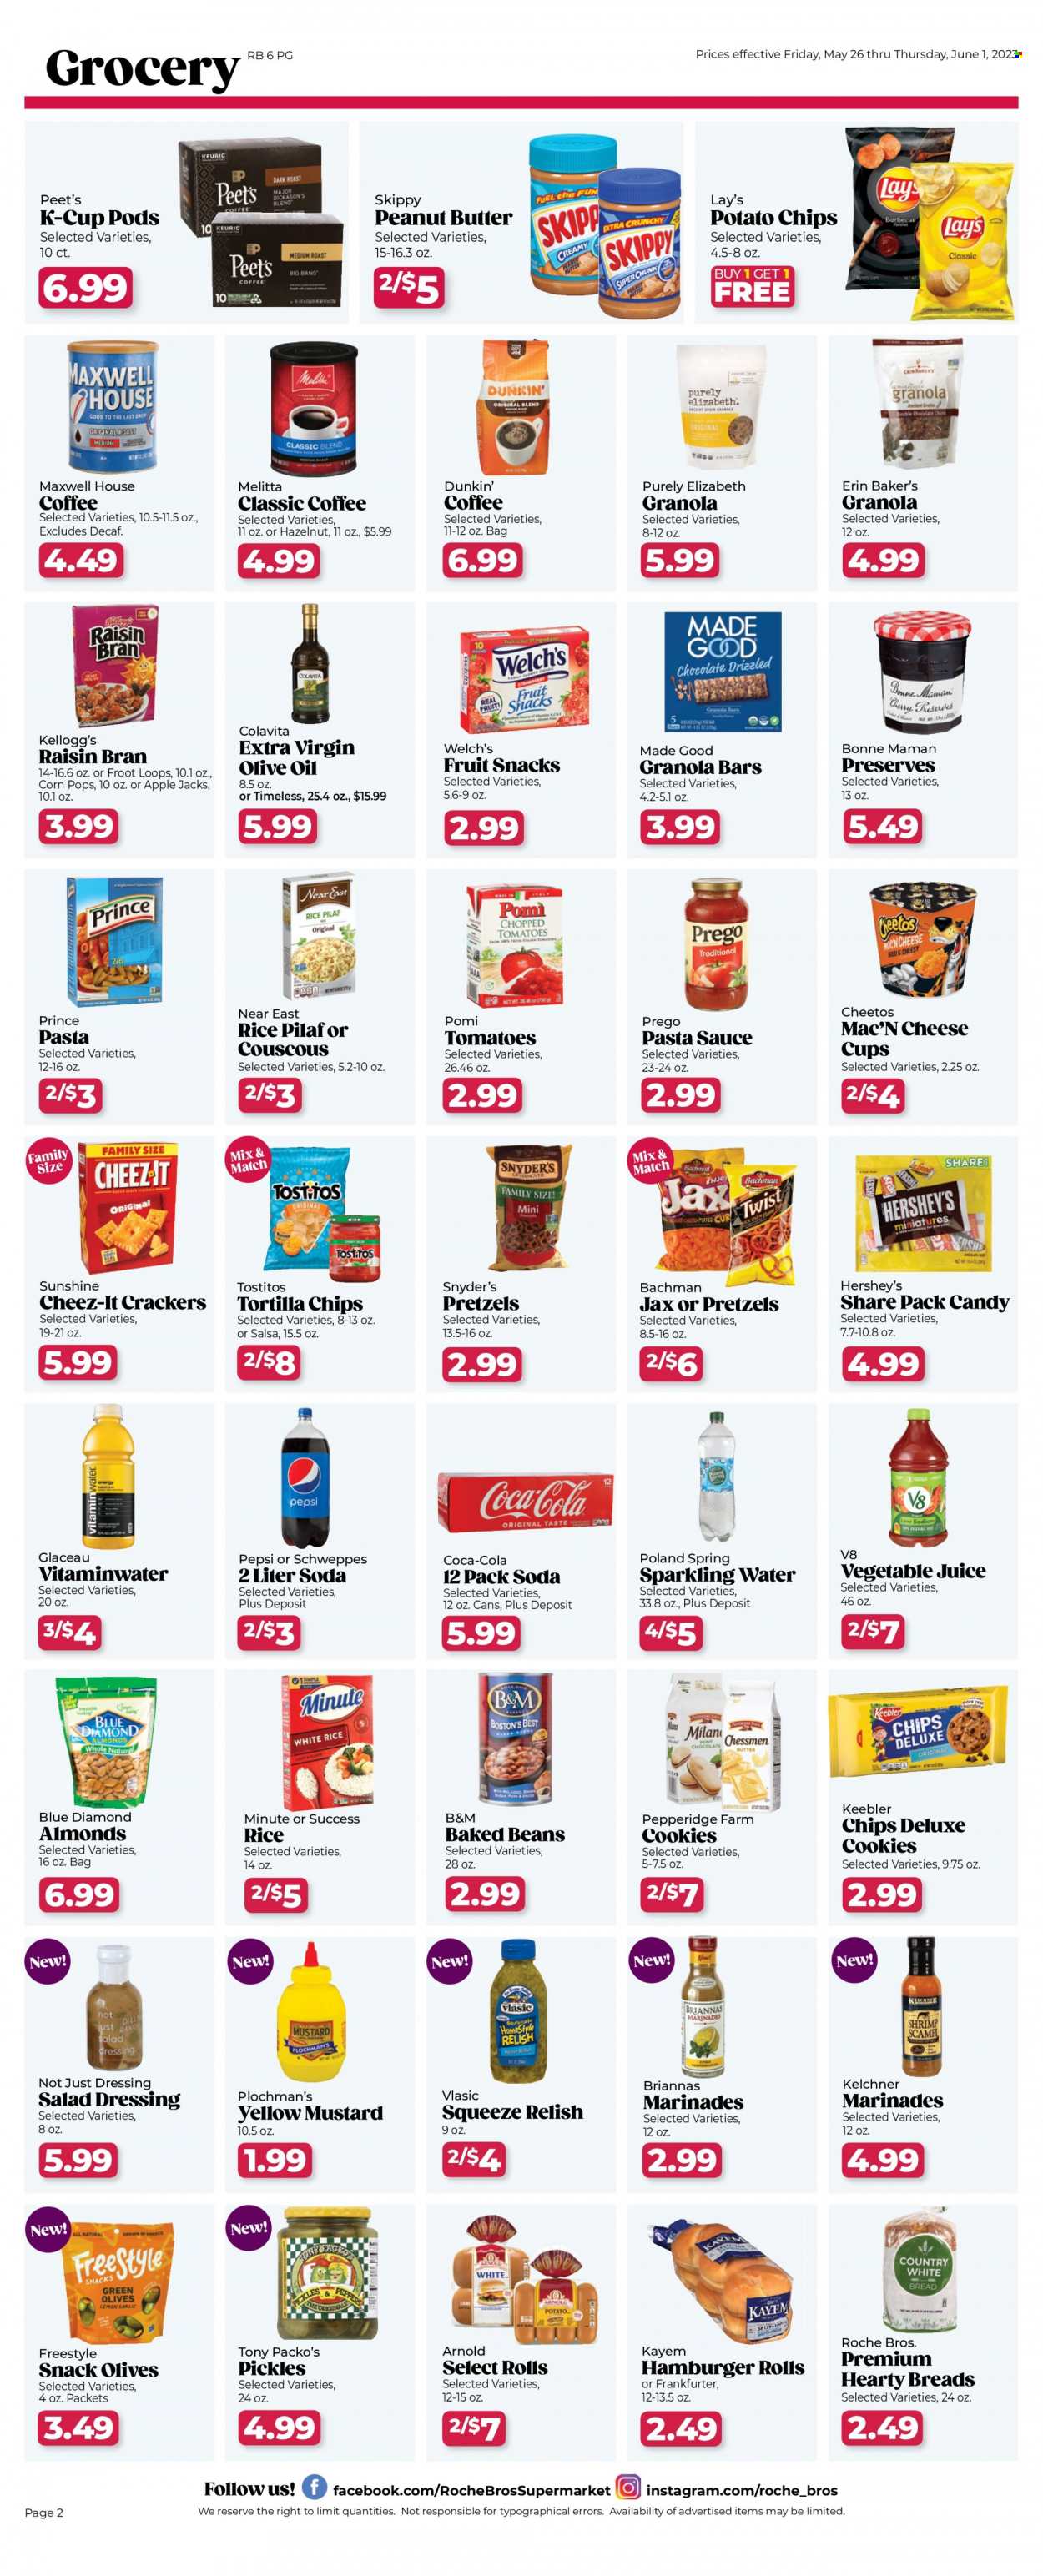 thumbnail - Roche Bros. Flyer - 05/26/2023 - 06/01/2023 - Sales products - pretzels, burger buns, Welch's, pasta sauce, hamburger, sauce, cheese cup, Sunshine, Hershey's, cookies, crackers, Kellogg's, fruit snack, Keebler, Candy, tortilla chips, potato chips, Cheetos, chips, Lay’s, Cheez-It, Tostitos, salty snack, pickles, olives, baked beans, granola bar, Corn Pops, Raisin Bran, couscous, rice, mustard, salad dressing, dressing, salsa, extra virgin olive oil, olive oil, oil, peanut butter, almonds, Blue Diamond, Coca-Cola, Schweppes, Pepsi, juice, soft drink, vegetable juice, soda, sparkling water, water, Maxwell House, coffee, coffee capsules, K-Cups. Page 2.